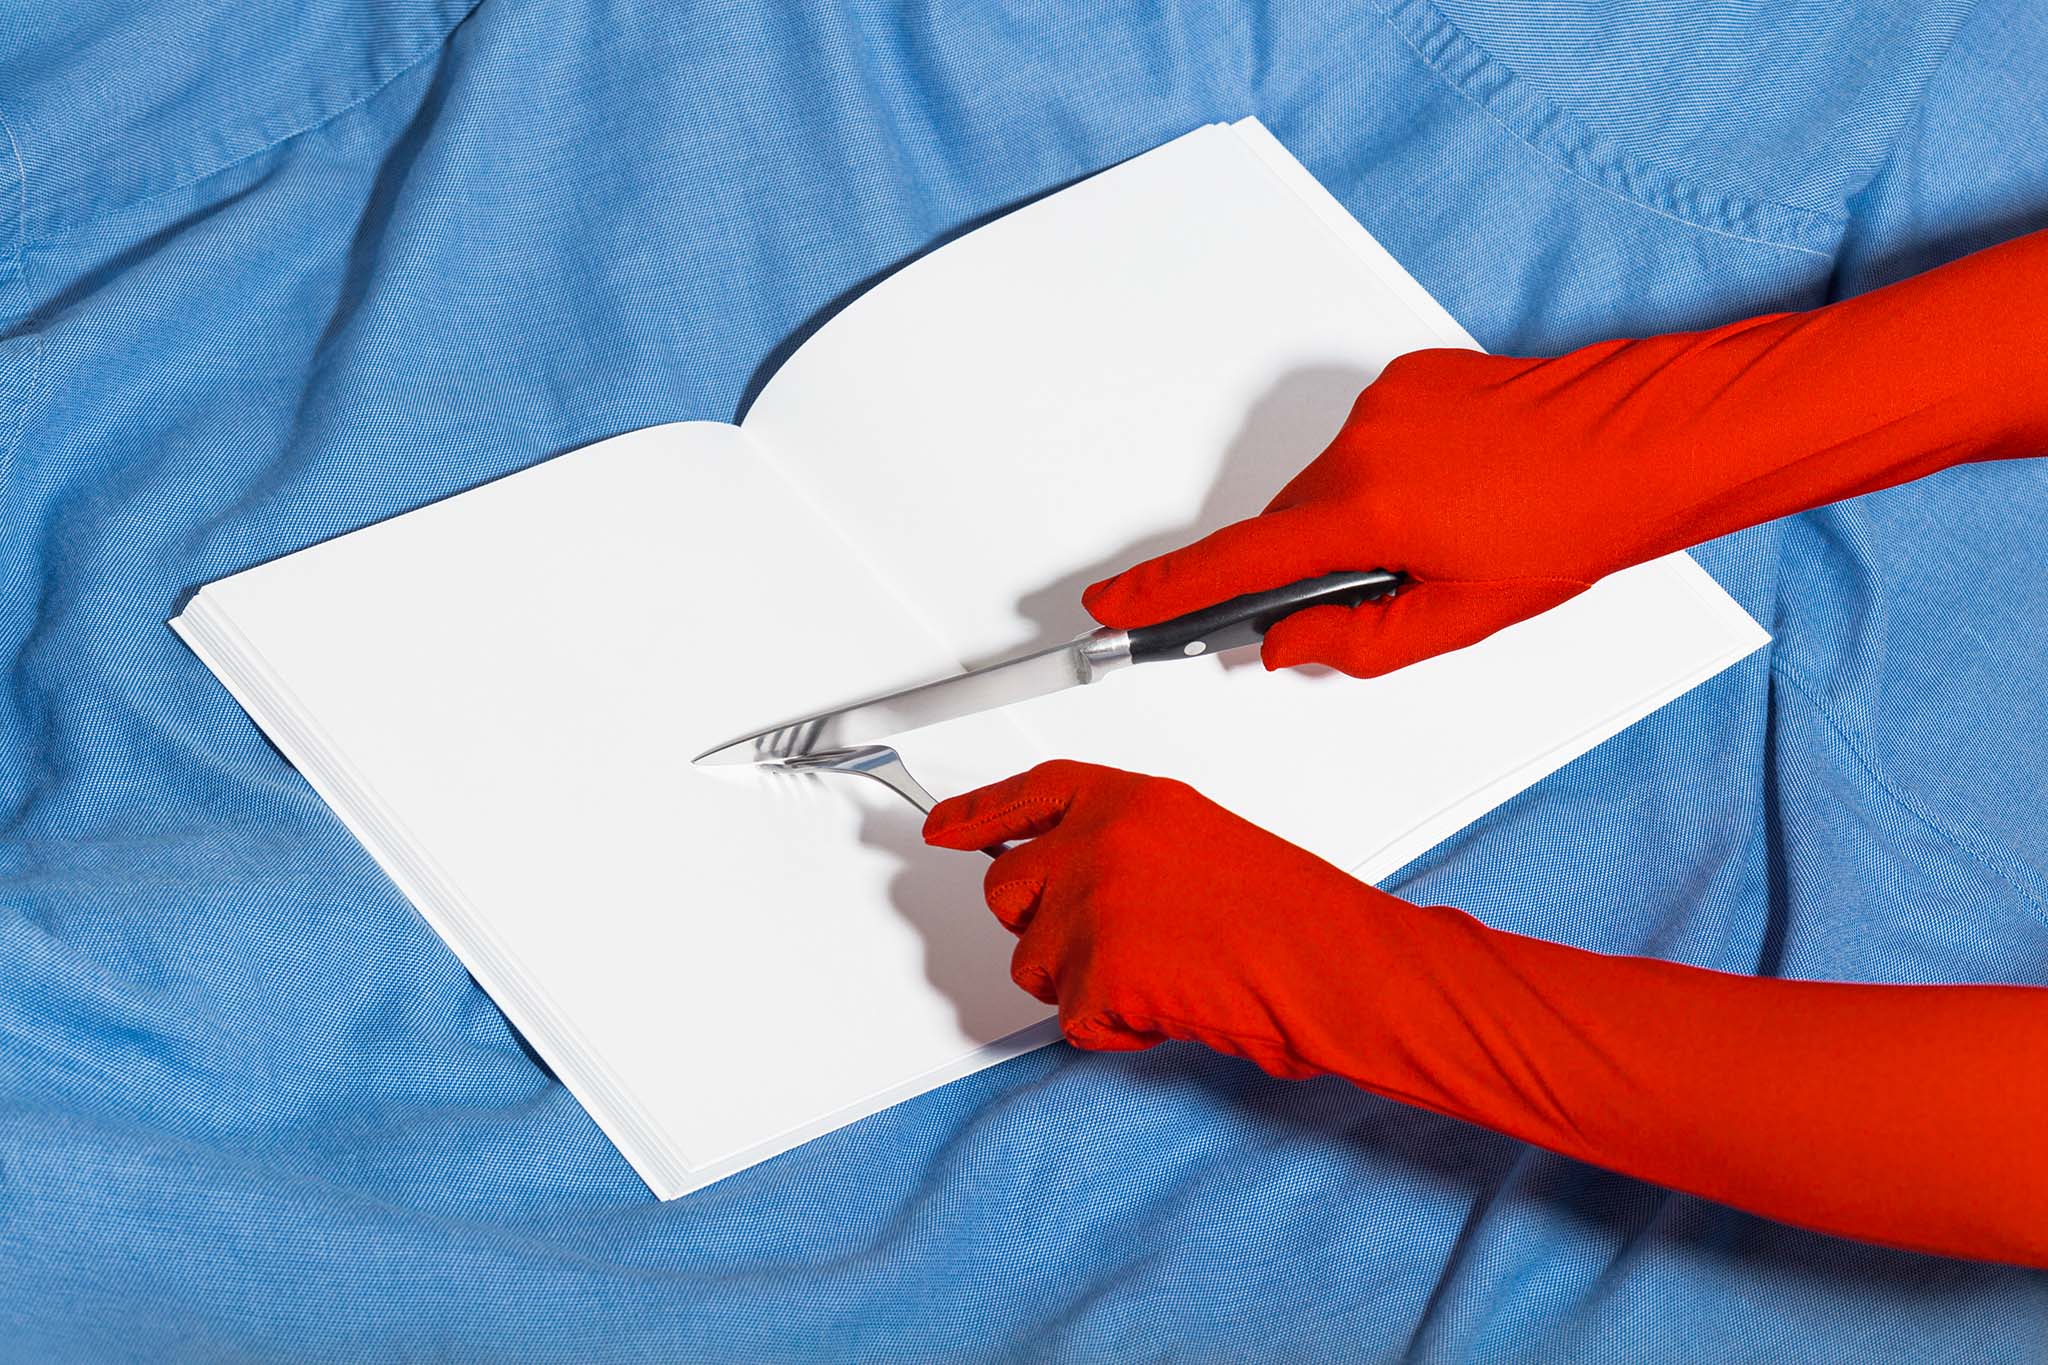 Two gloved hands holding utensils over an open book mockup set against light blue fabric, empty mockup.